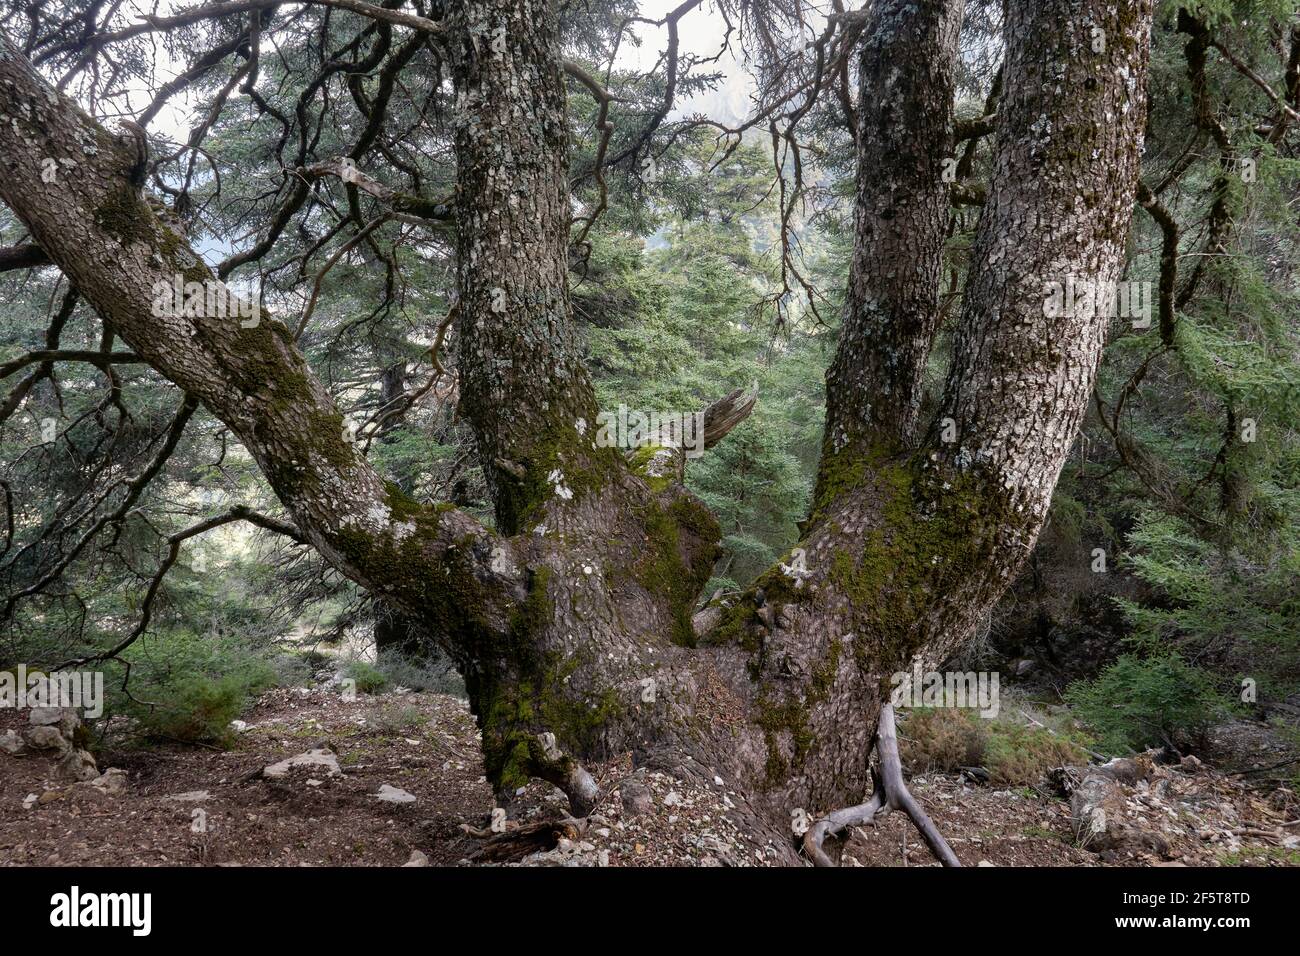 detail of Spanish fir (abies pinsapo) trunk in the Yunquera fir tree, in the Sierra de las Nieves national park in Malaga. Andalusia, Spain Stock Photo